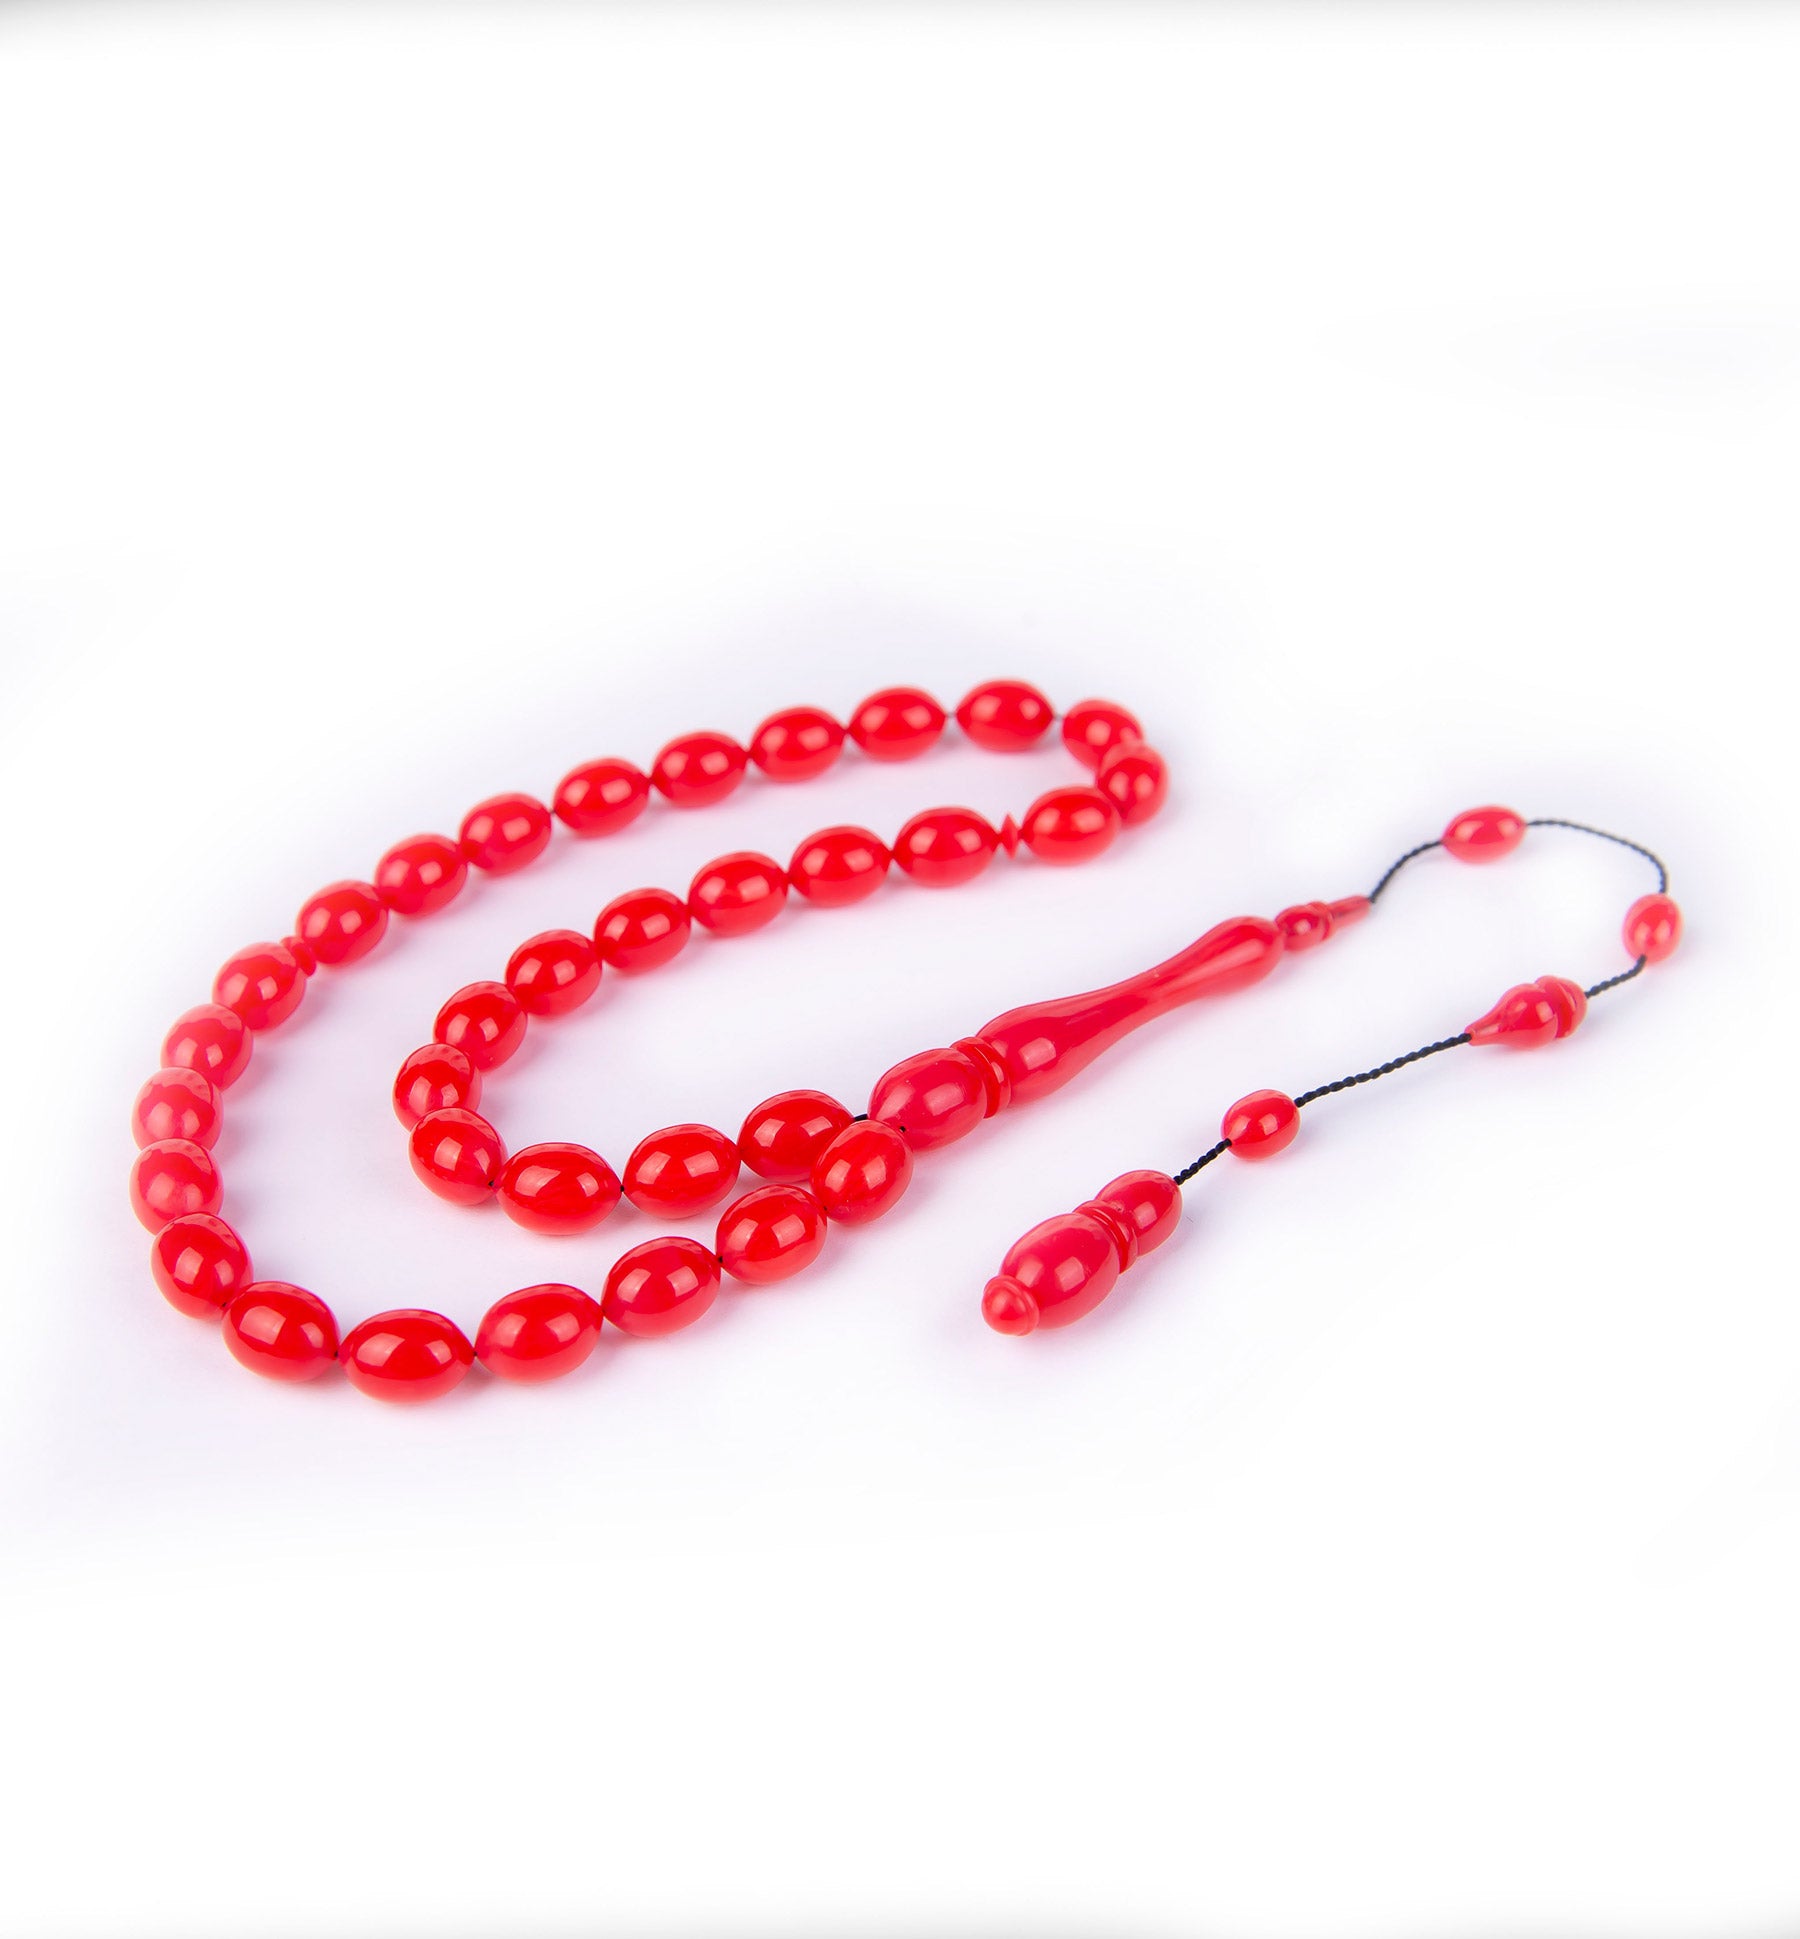 Systematic Solid Cut and Pressed Amber Prayer Beads 4